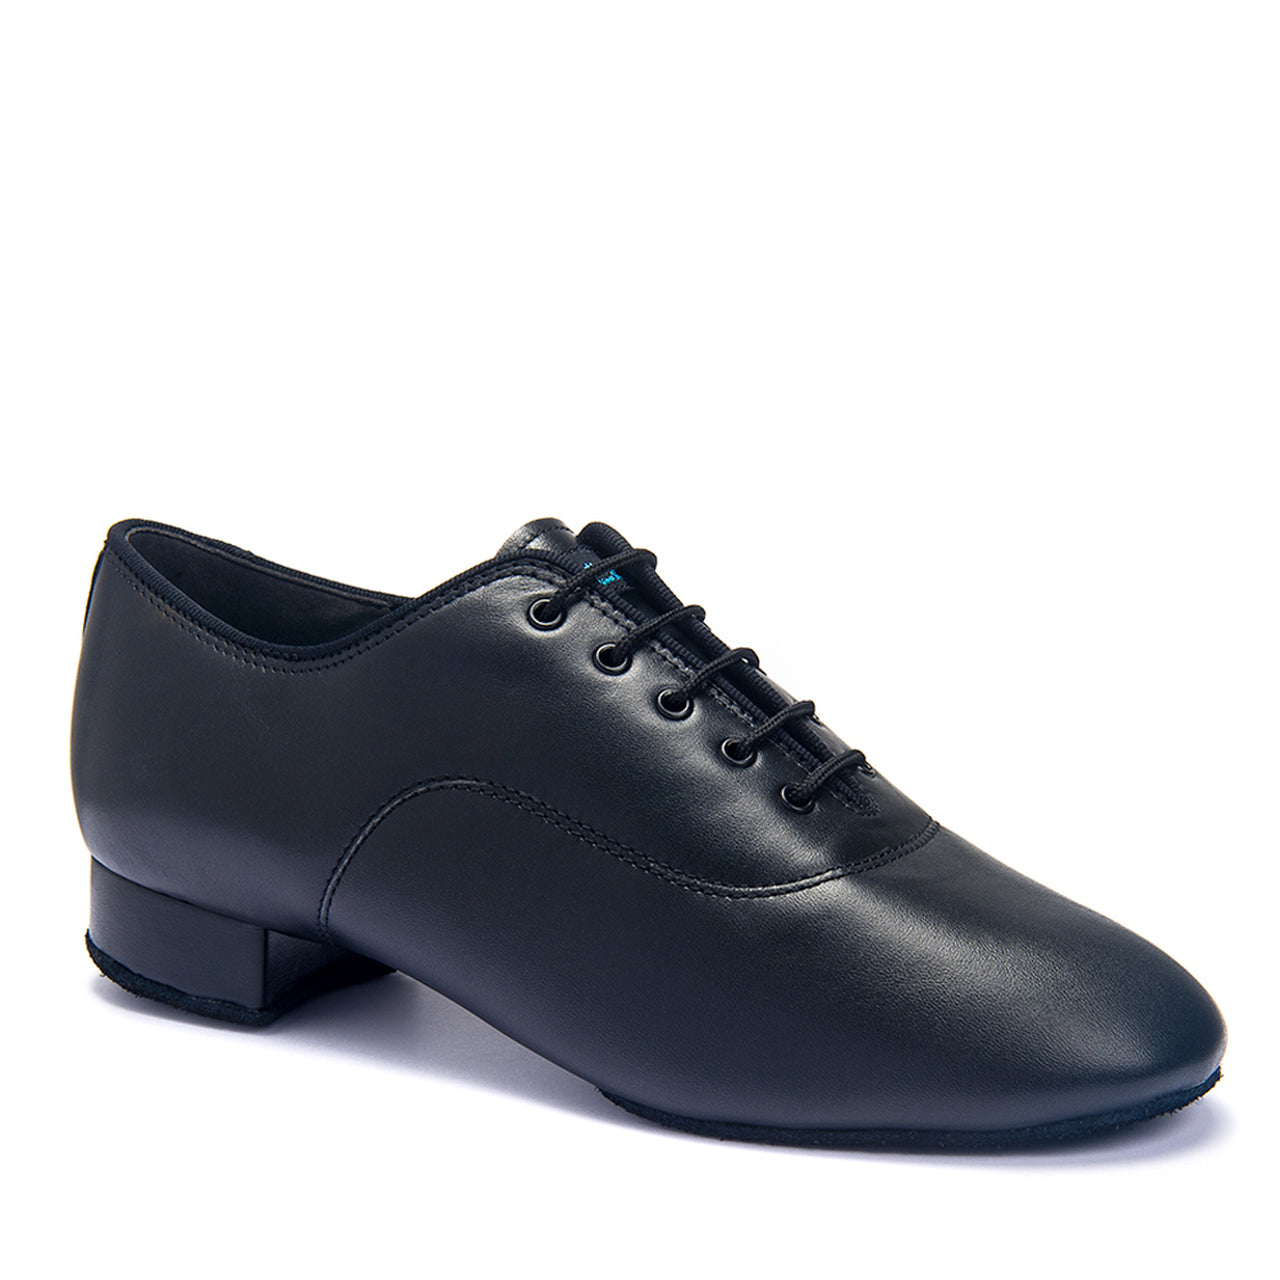 International Dance Shoes IDS Ballroom Standard or Smooth Men's Dance Shoe Available in 4 Material Options CONTRA